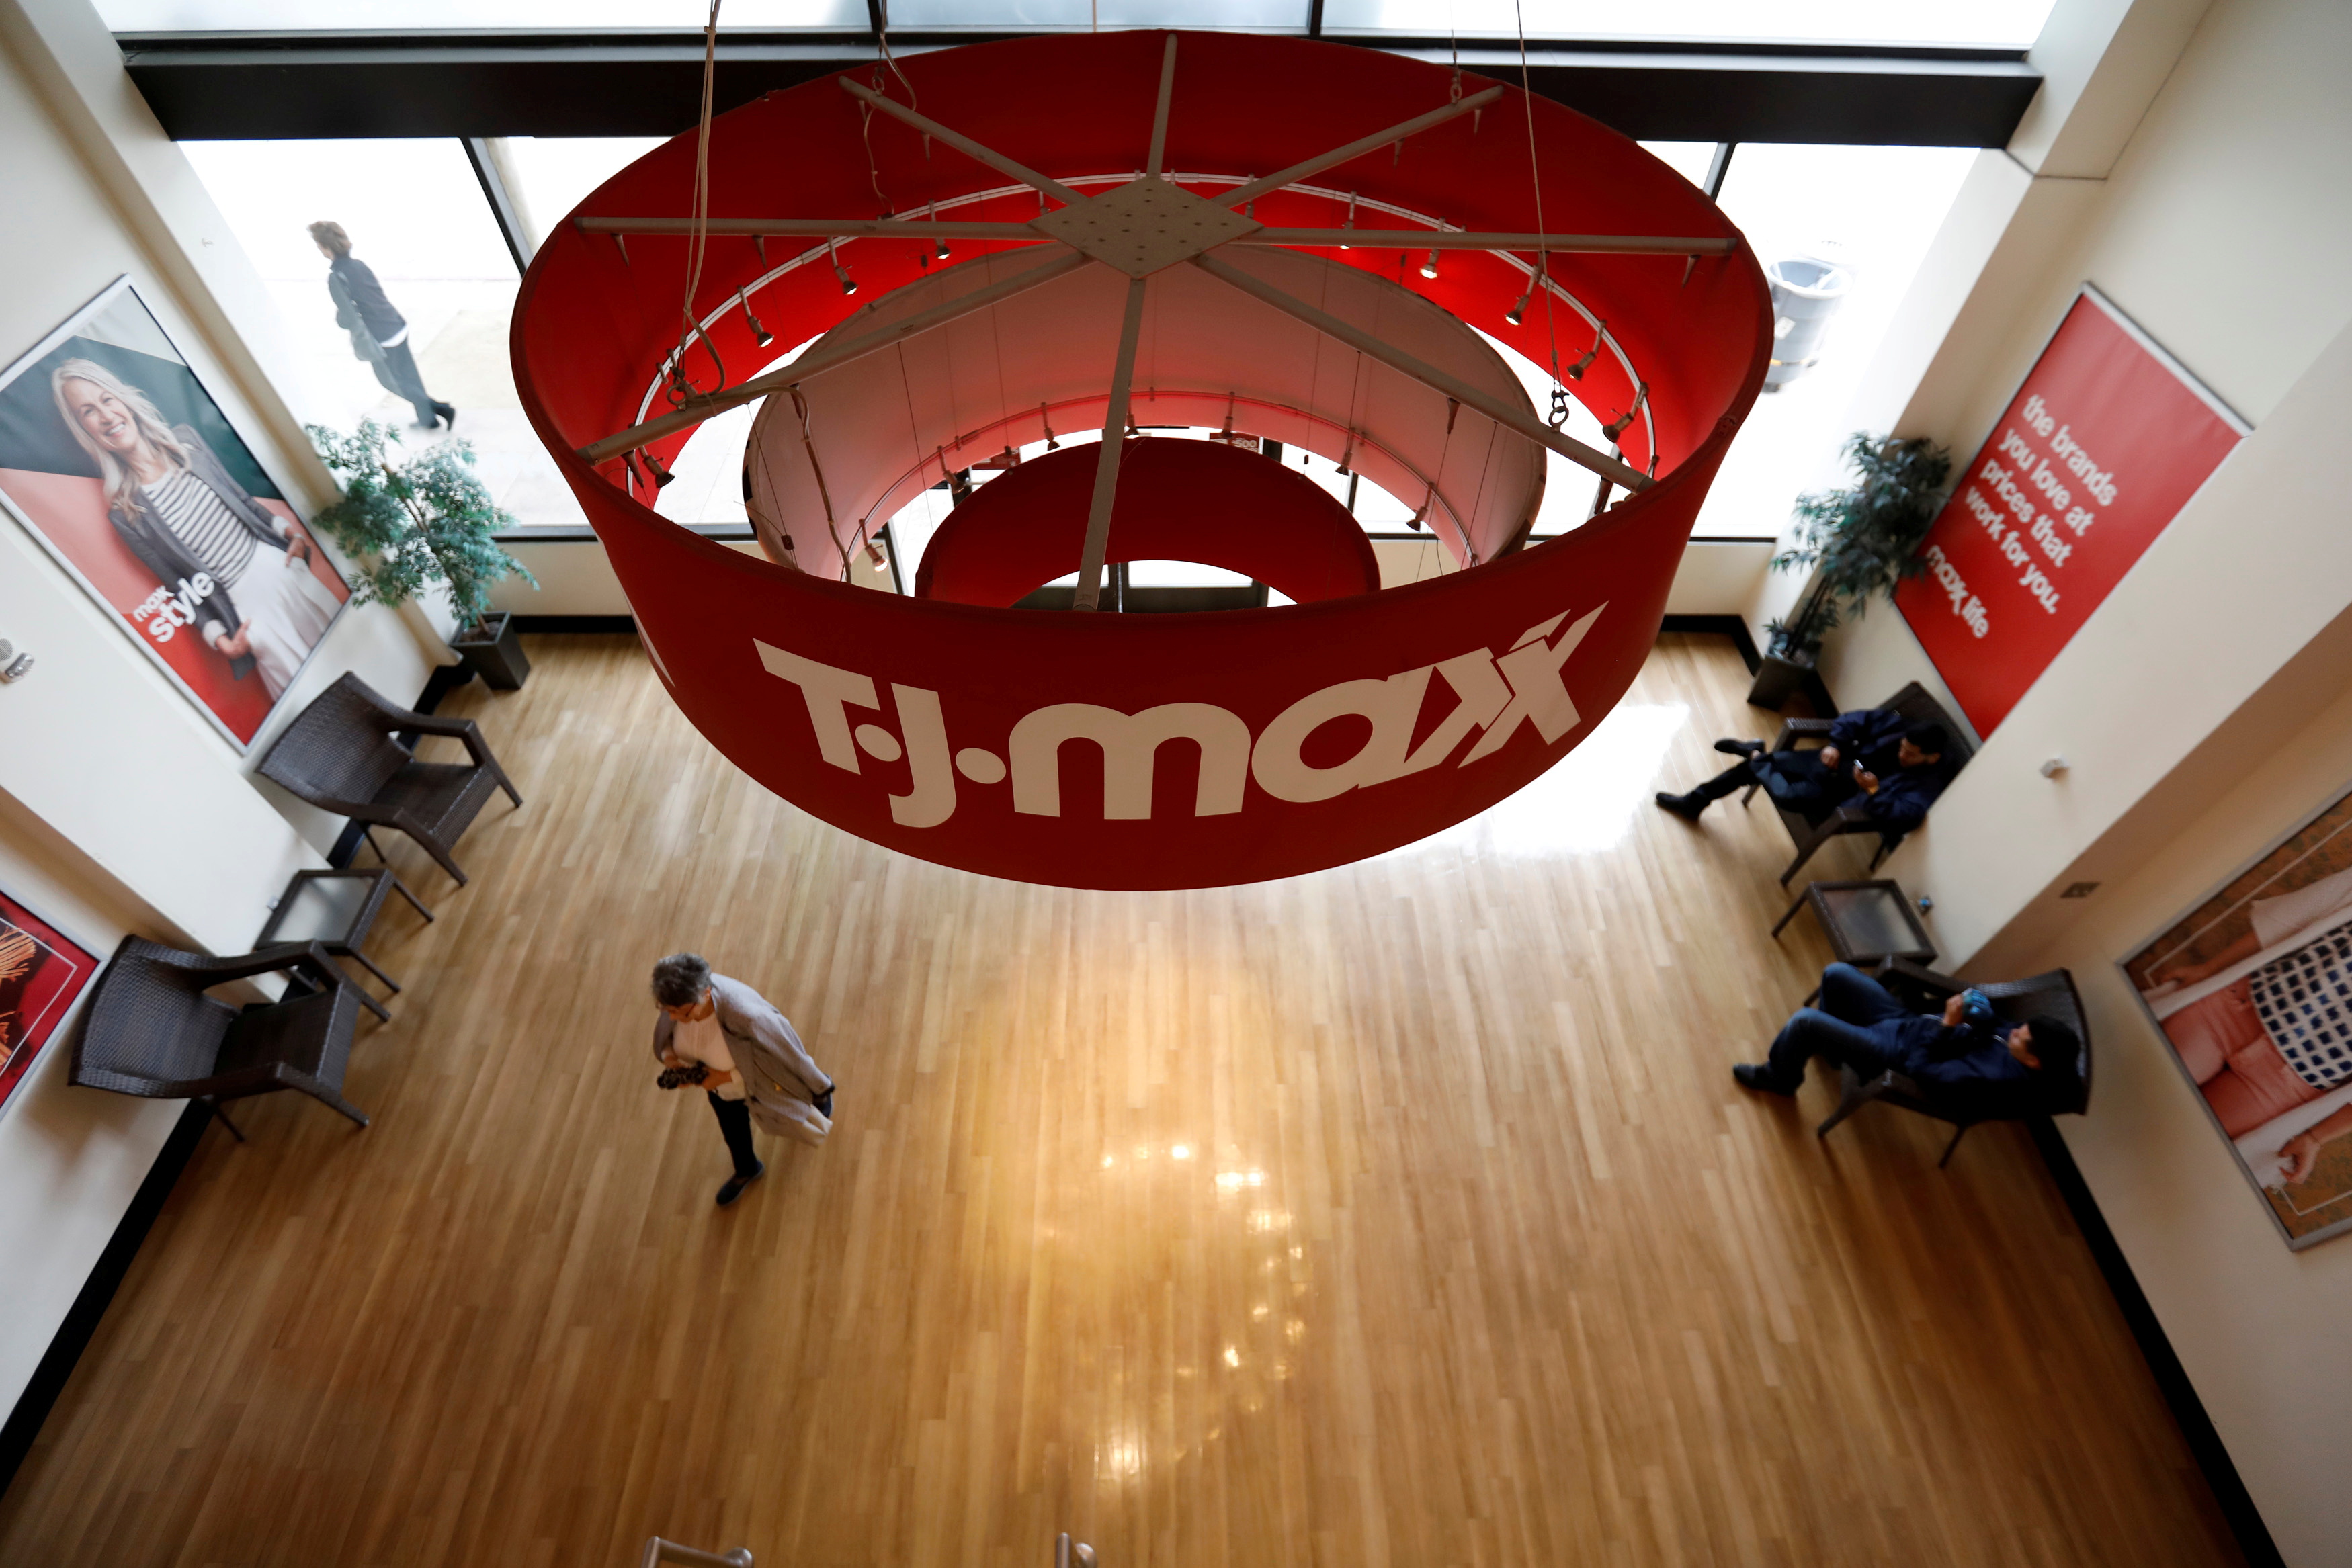 TJ Maxx parent lifts annual forecast on demand for discounted